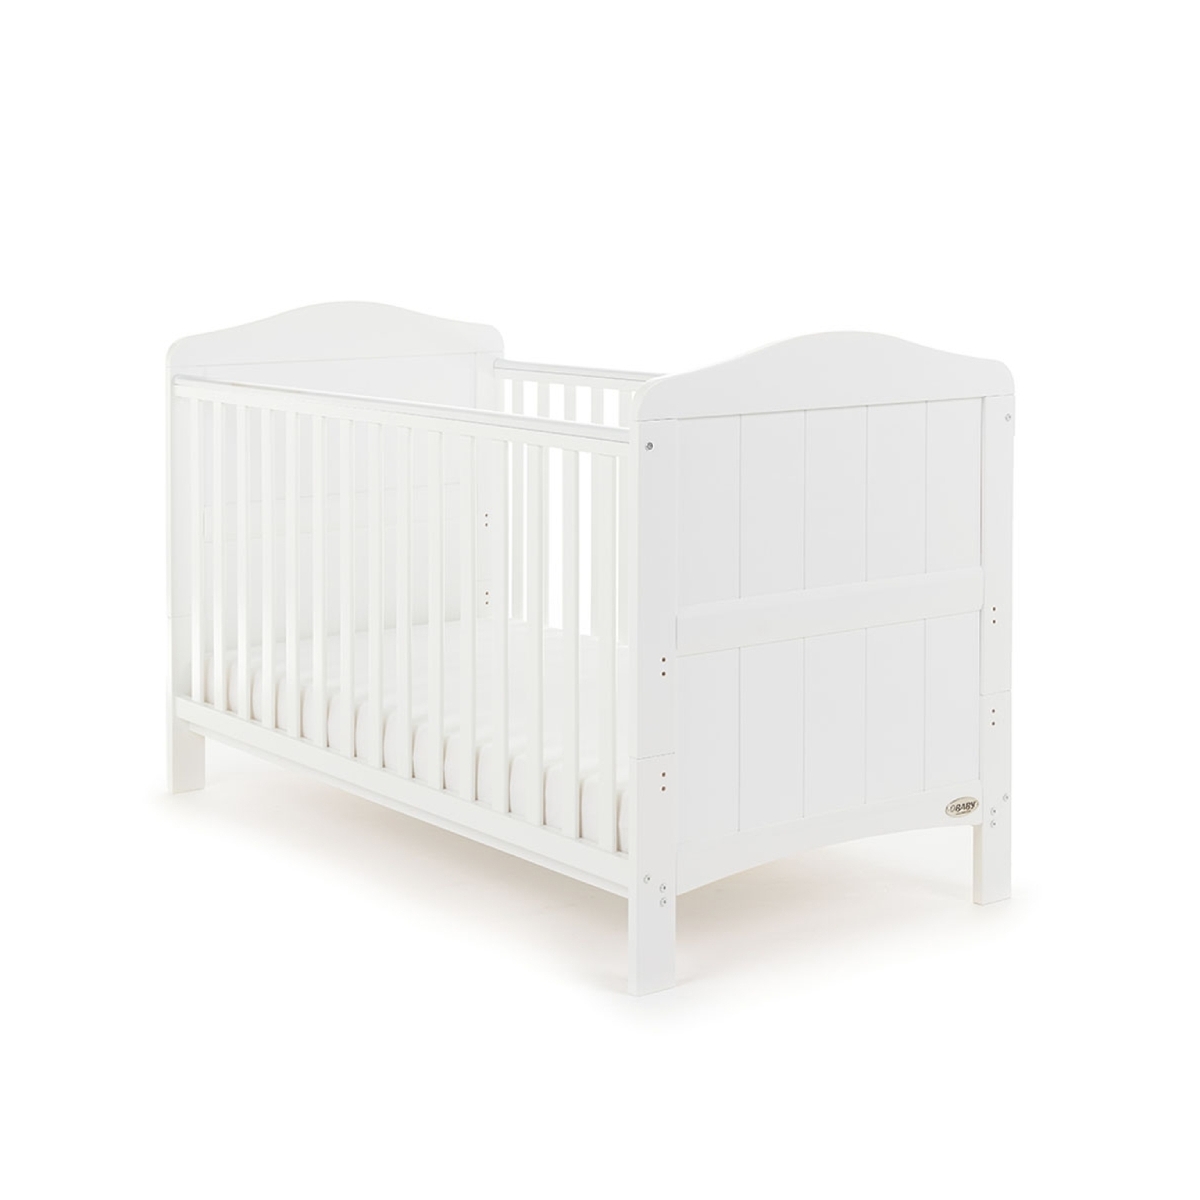 Obaby Whitby Cot Bed & Foam Mattress